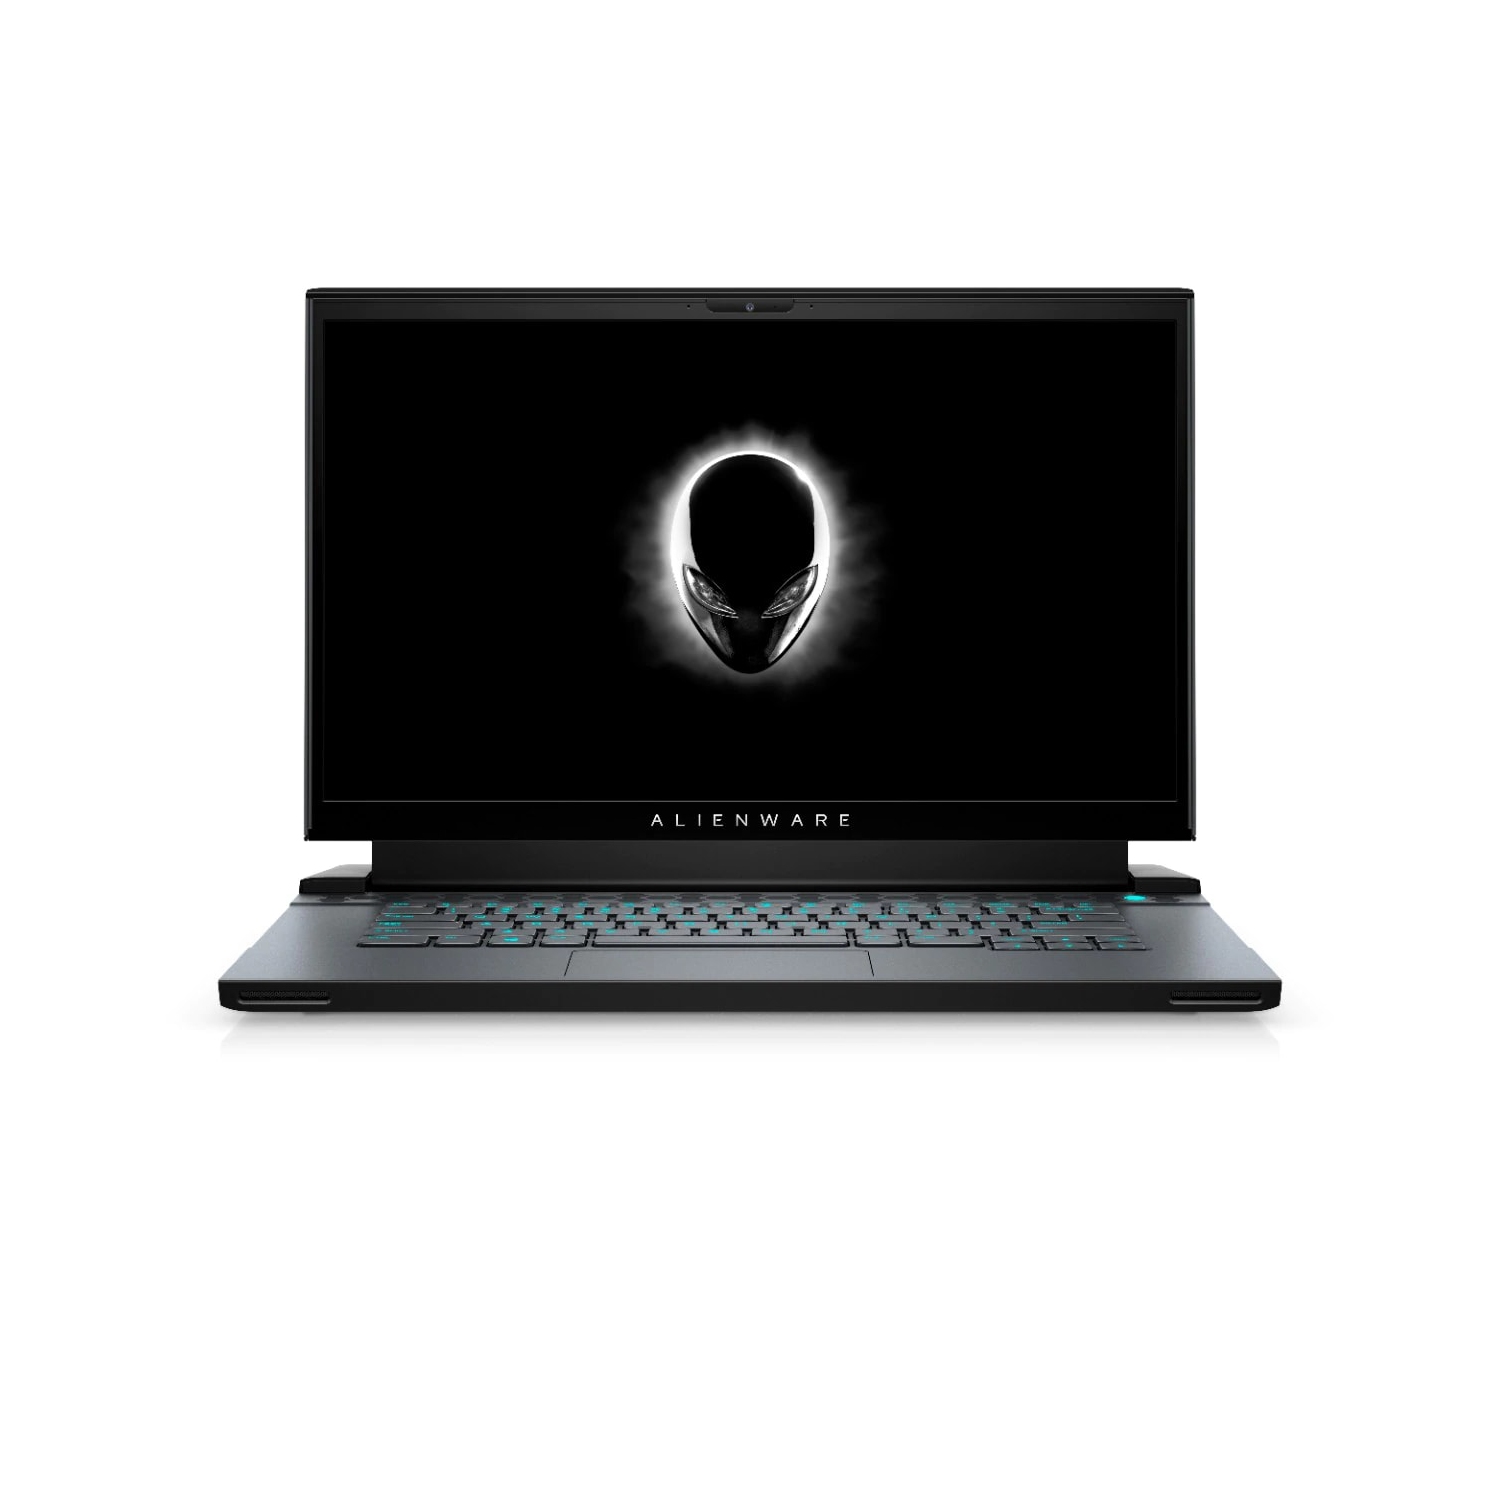 Refurbished (Excellent) - Dell Alienware m15 R4 Gaming Laptop (2021), 15.6" FHD, Core i7, 2TB SSD, 32GB RAM, RTX 3080, 8 Cores @ 5 GHz, 10th Gen CPU Certified Refurbished